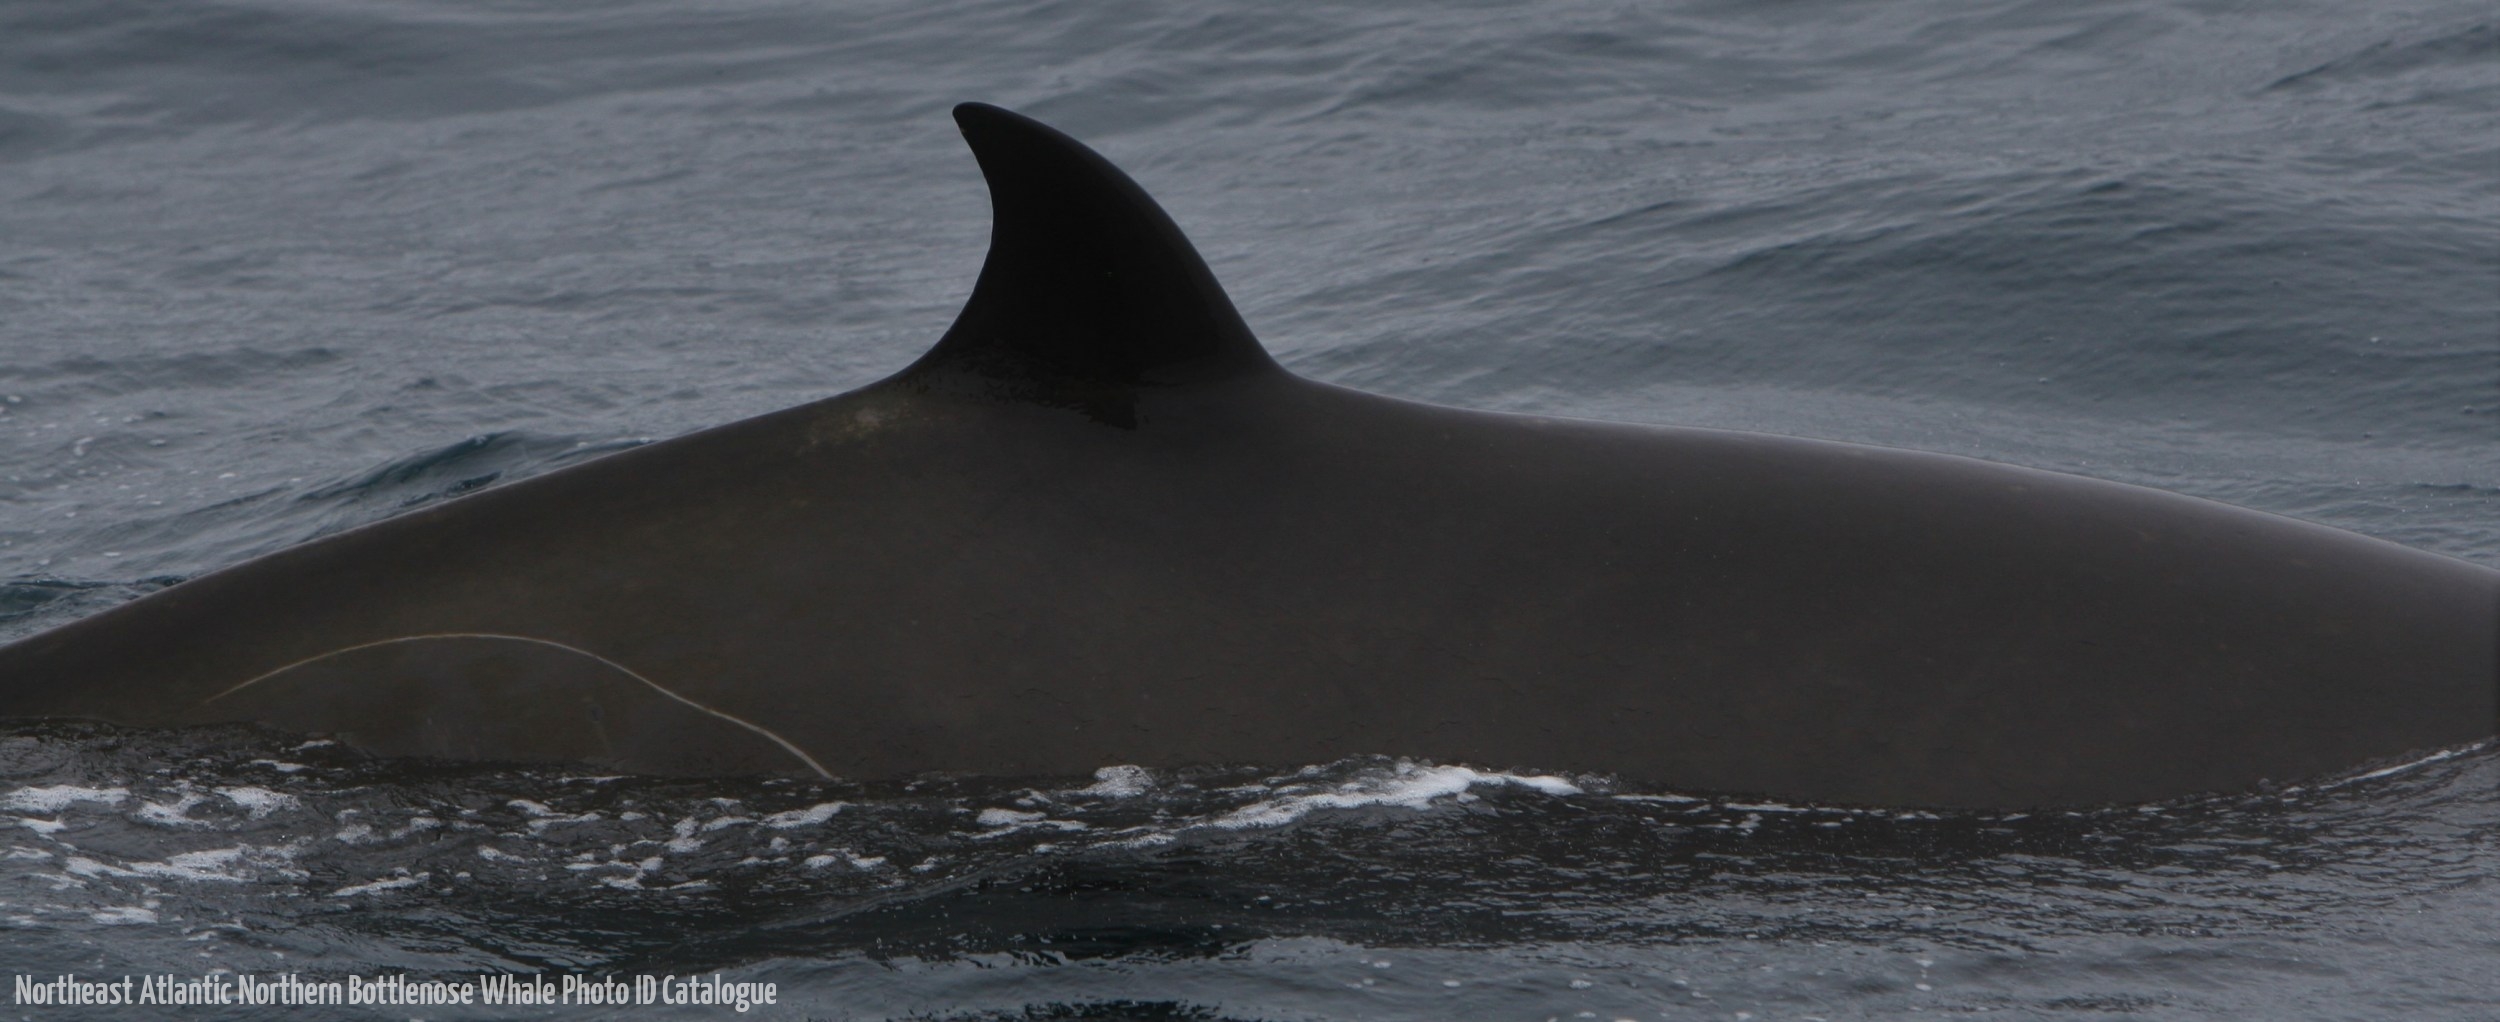 Whale ID: 0337,  Date taken: 22-06-2015,  Photographer: Unknown/project camera